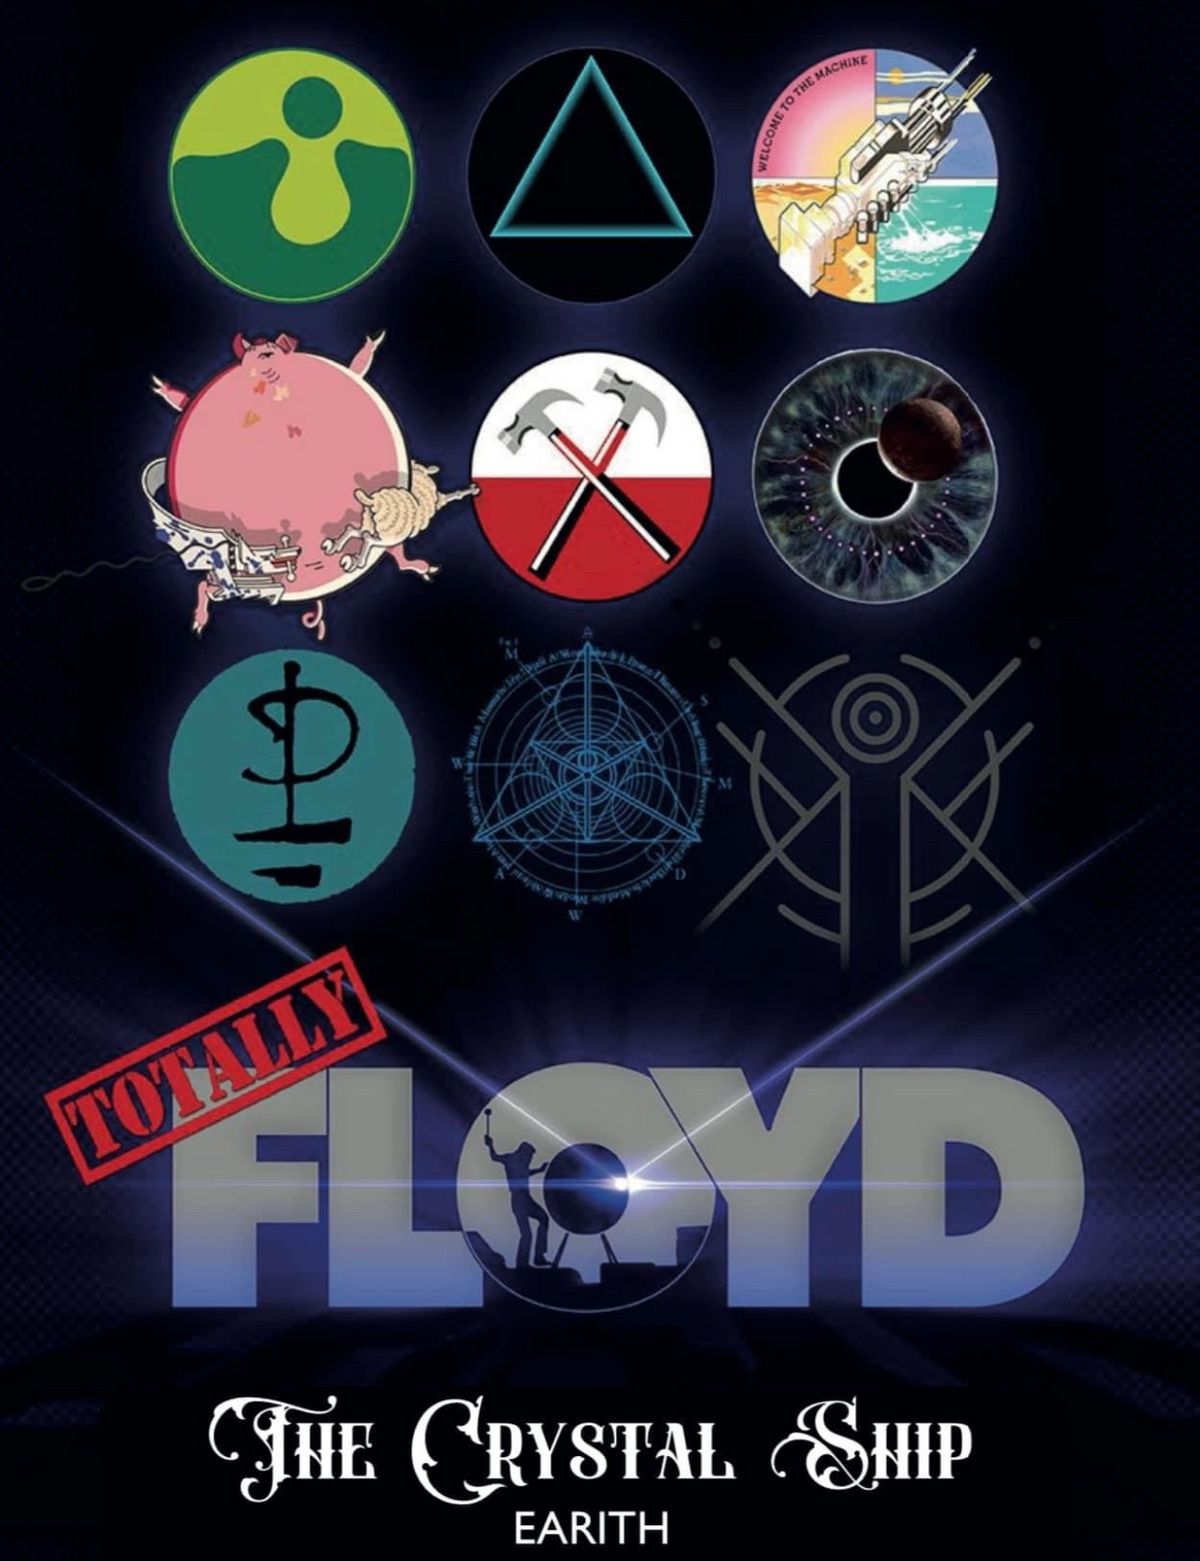 Totally Floyd - Live at The Crystal Ship, Earith